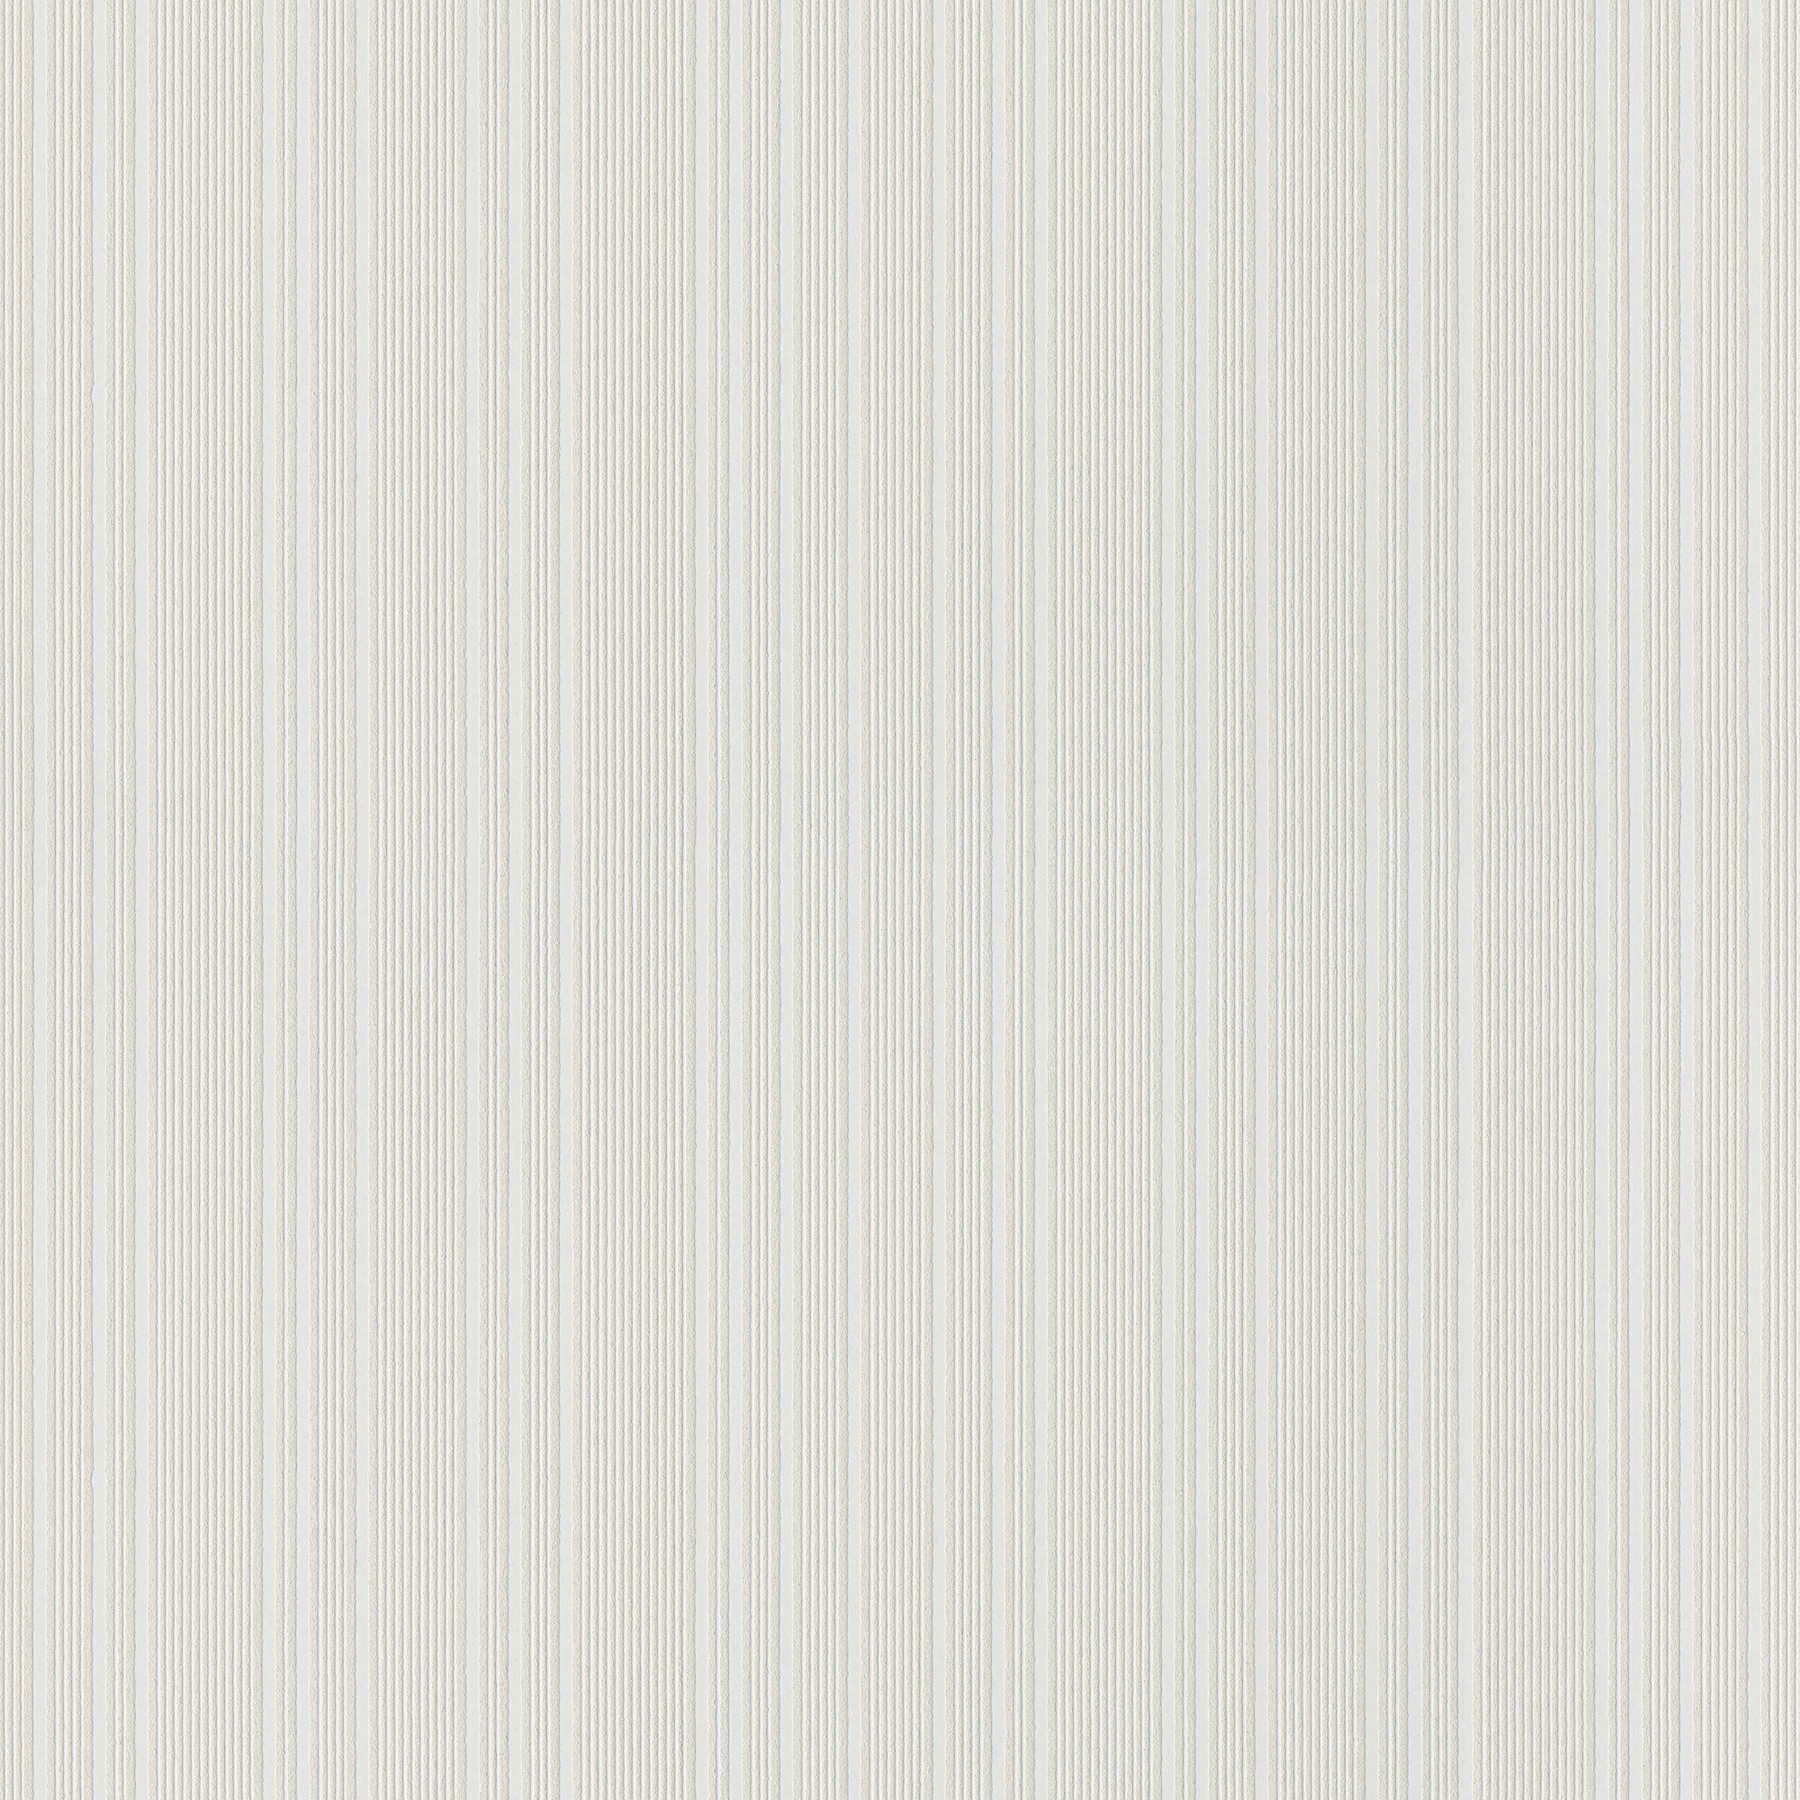 Paintable non-woven wallpaper with line pattern - white
